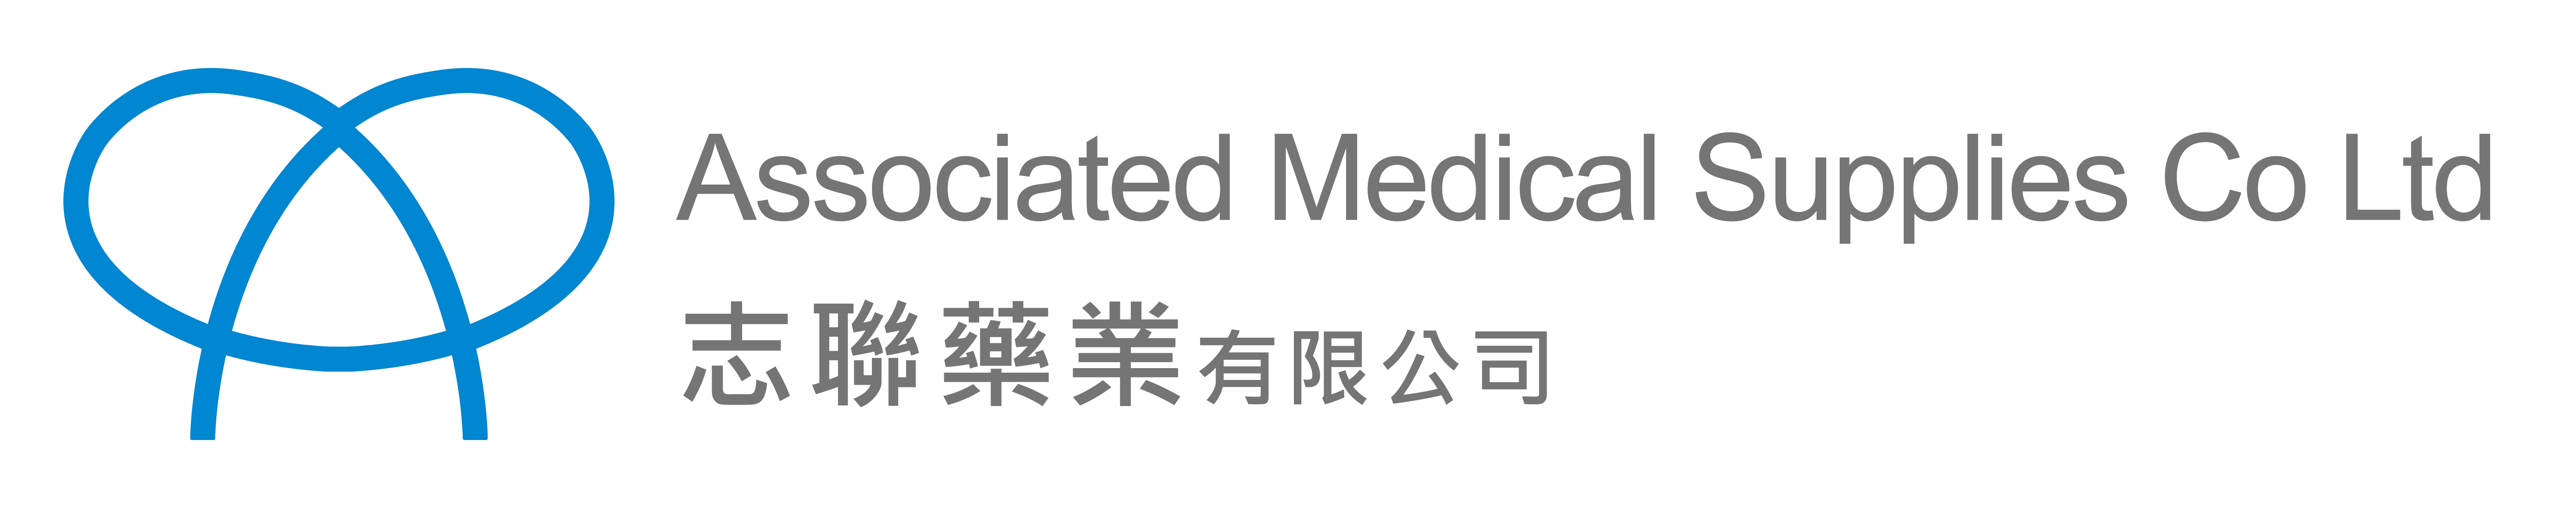 Company name_Associated medical supplies